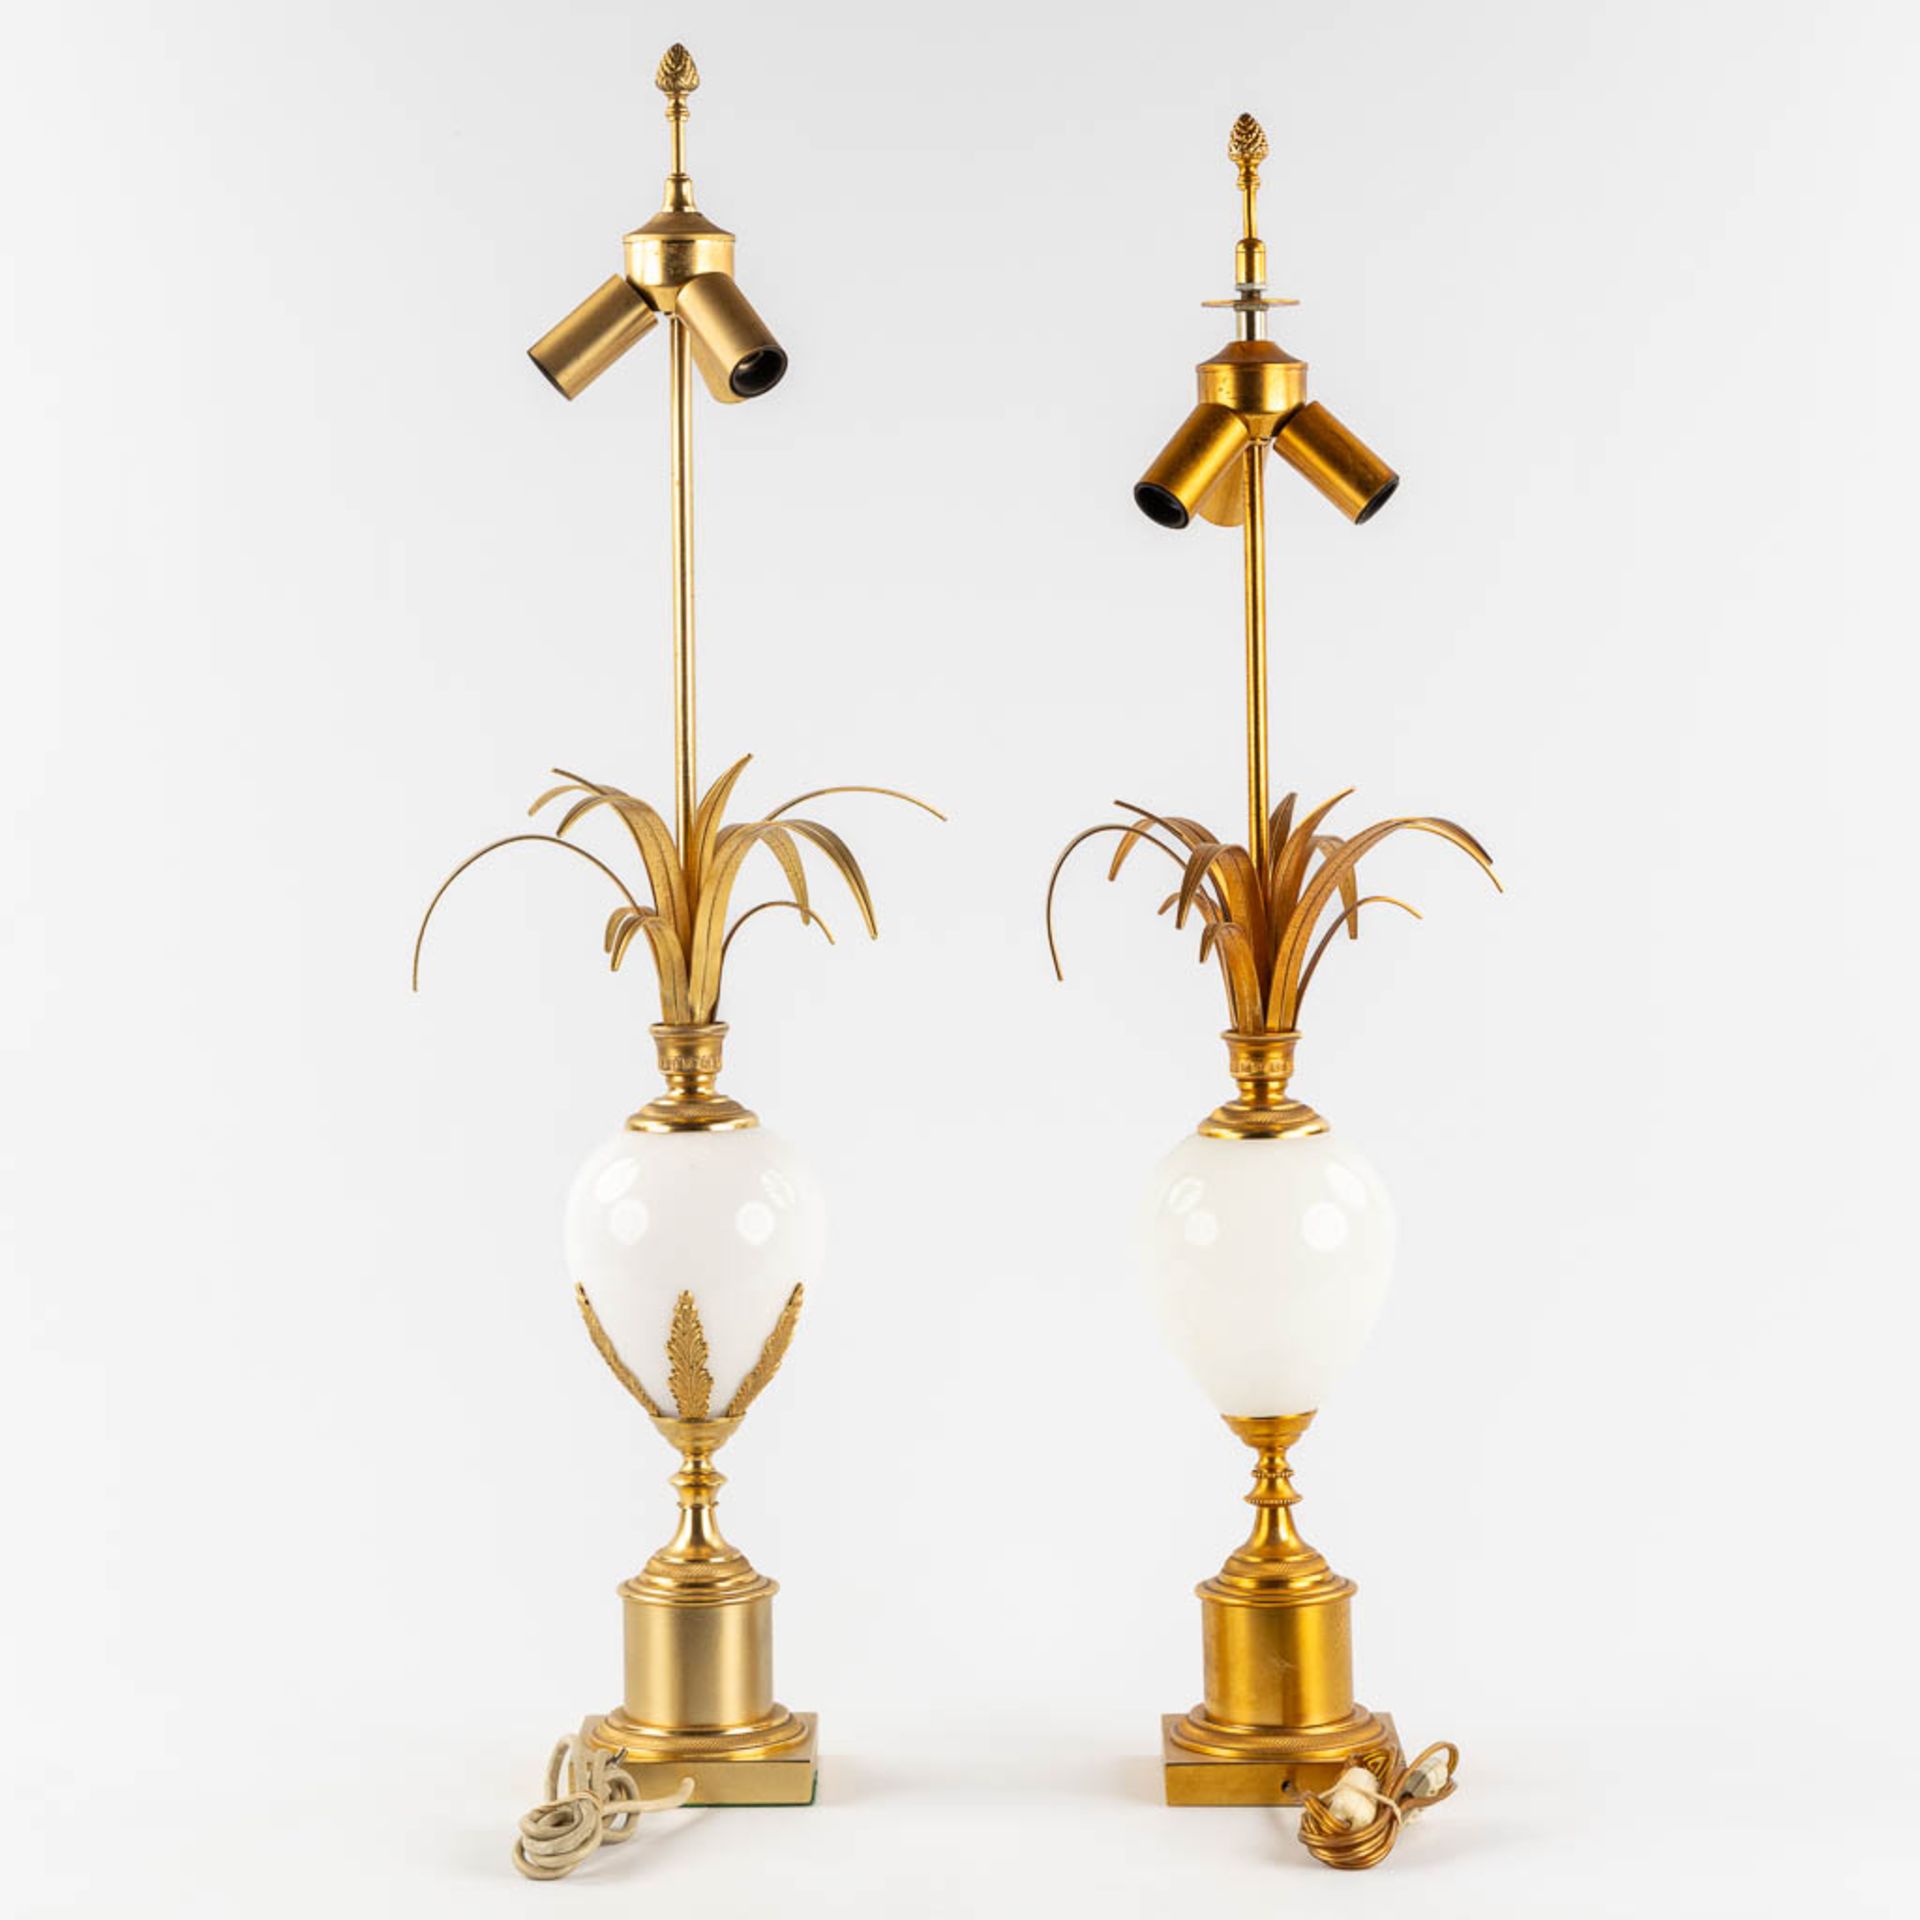 A pair of Hollywood Regency table lamps with opaline glass. (H:77 x D:20 cm) - Image 5 of 11